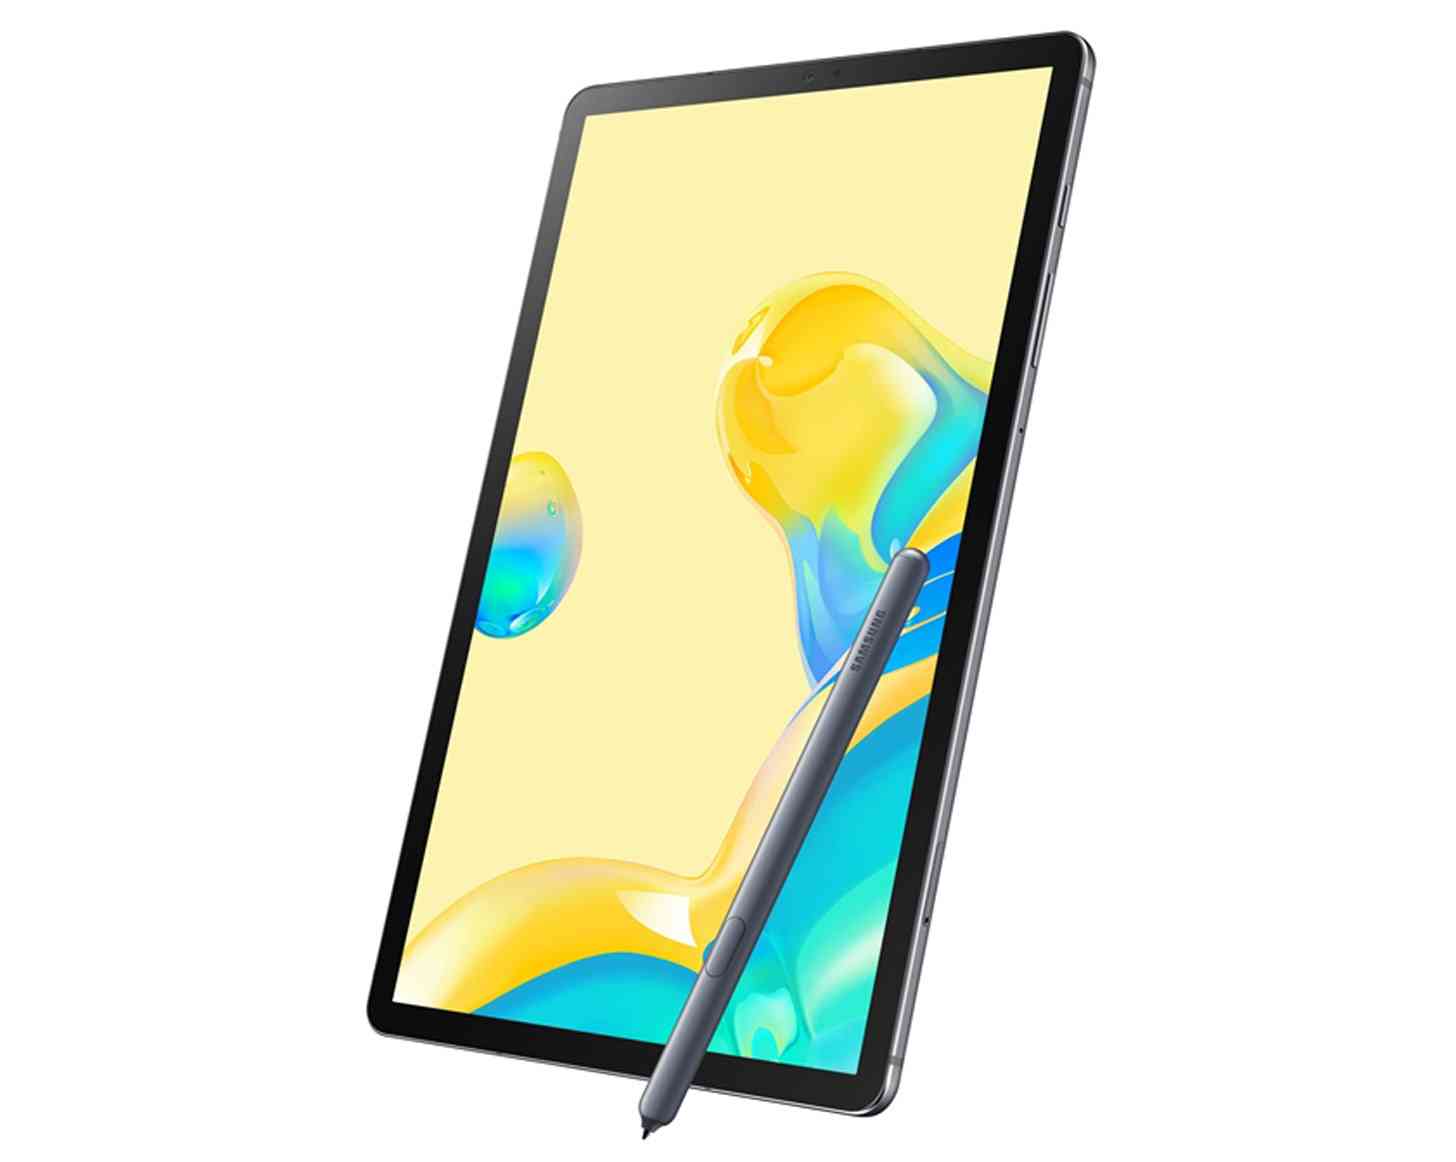 Galaxy Tab S6 5G official